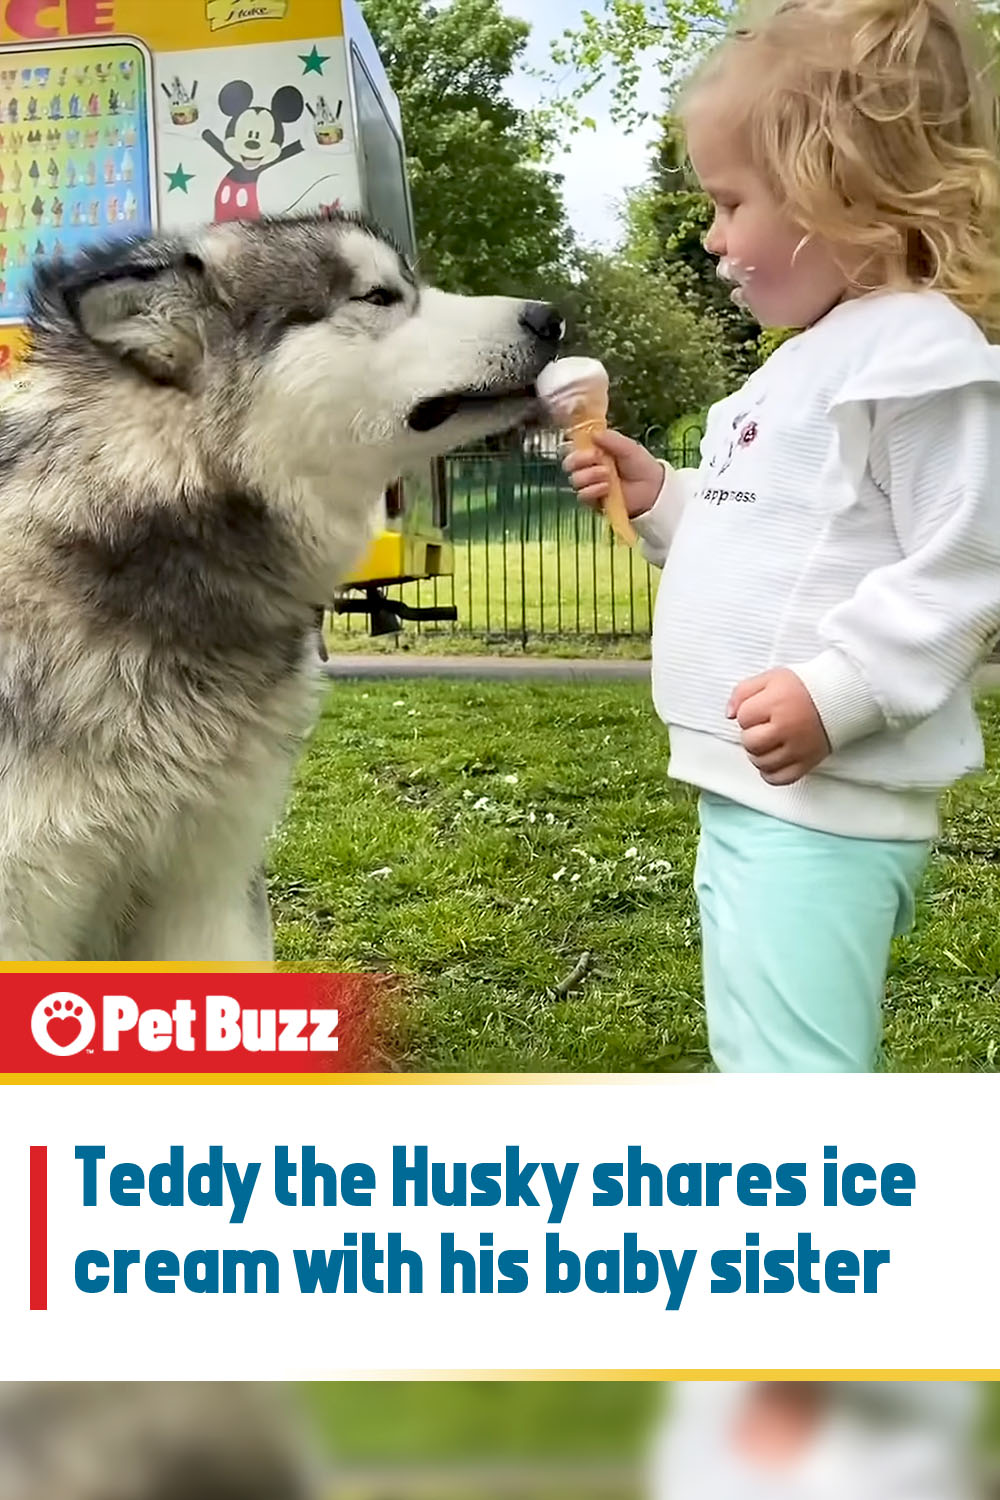 Teddy the Husky shares ice cream with his baby sister